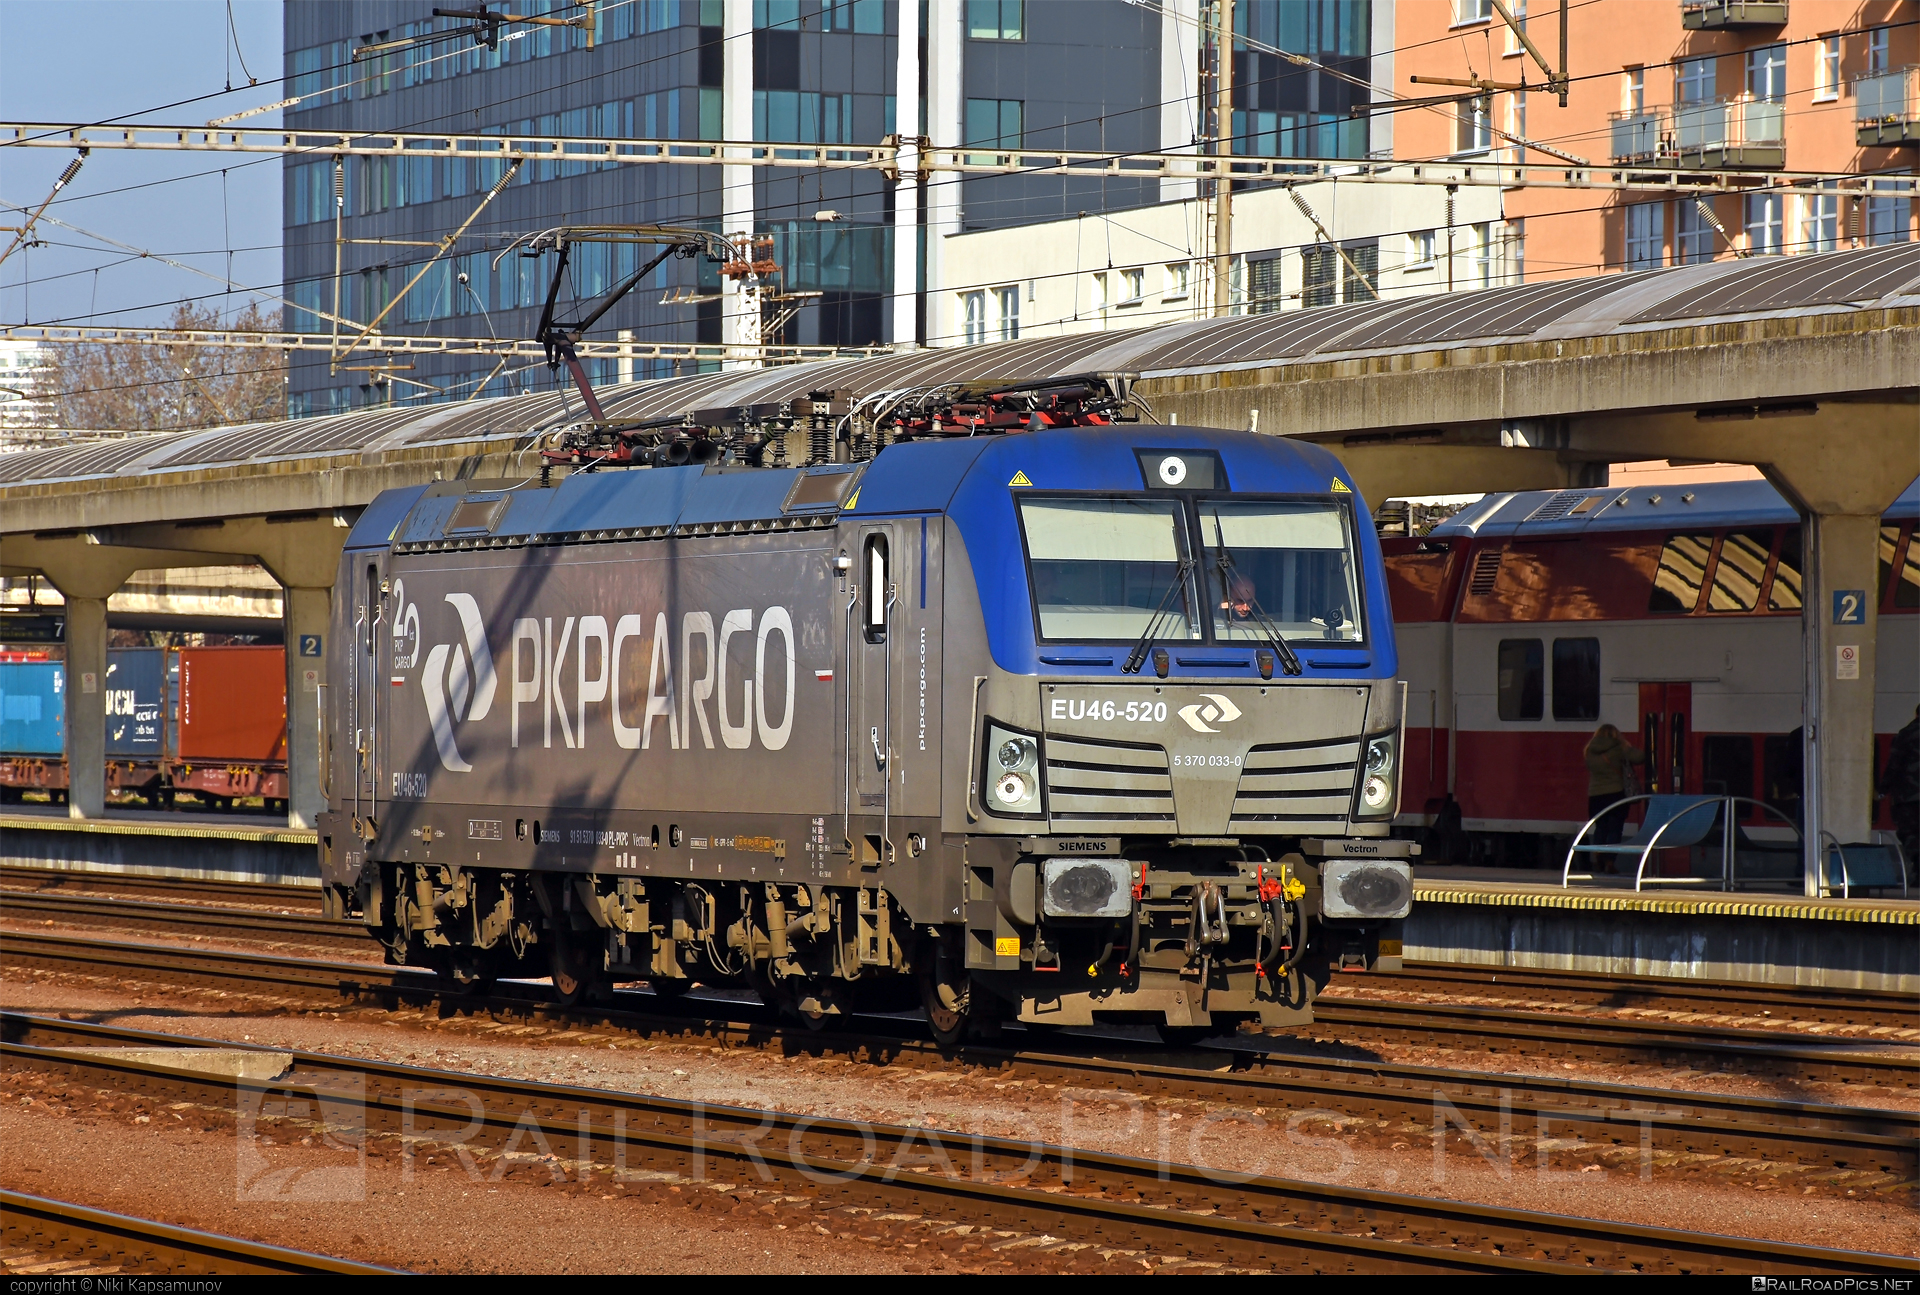 Siemens Vectron MS - 5 370 033-0 operated by PKP CARGO Spólka Akcyjna #pkp #pkpcargo #pkpcargospolkaakcyjna #siemens #siemensVectron #siemensVectronMS #vectron #vectronMS